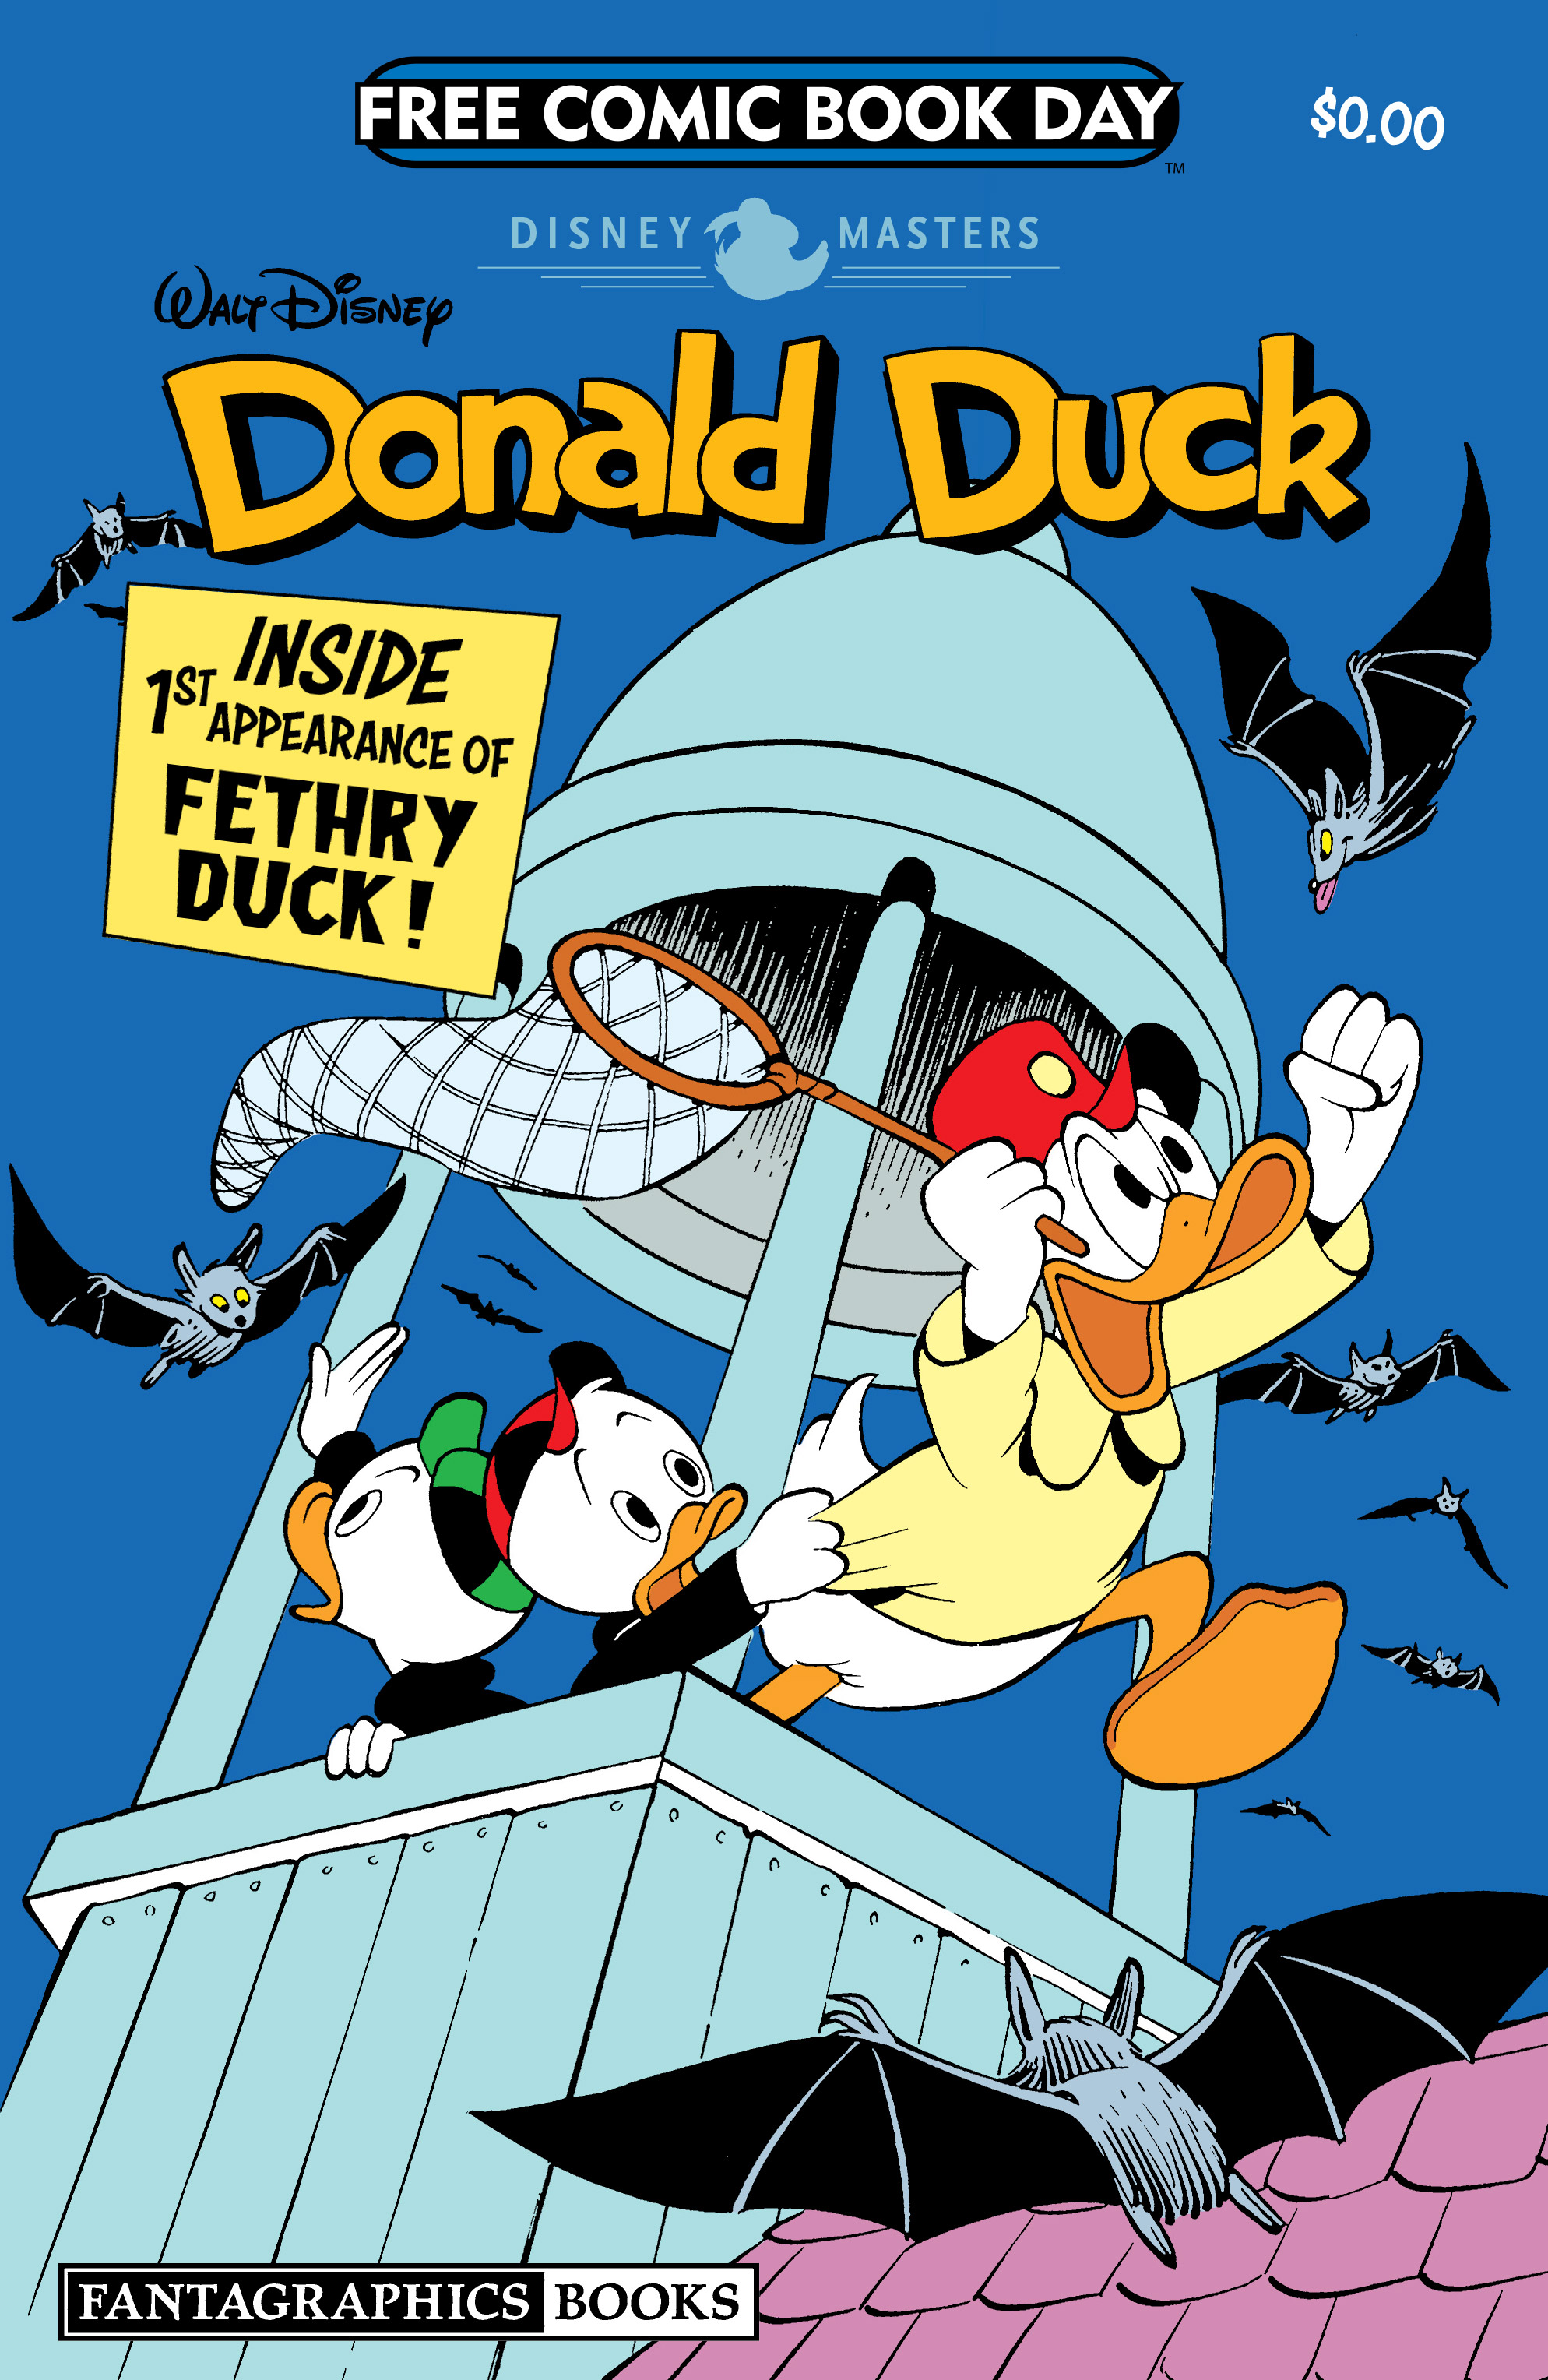 Read online Free Comic Book Day 2020 comic -  Issue # Disney Masters - Donald Duck - 1